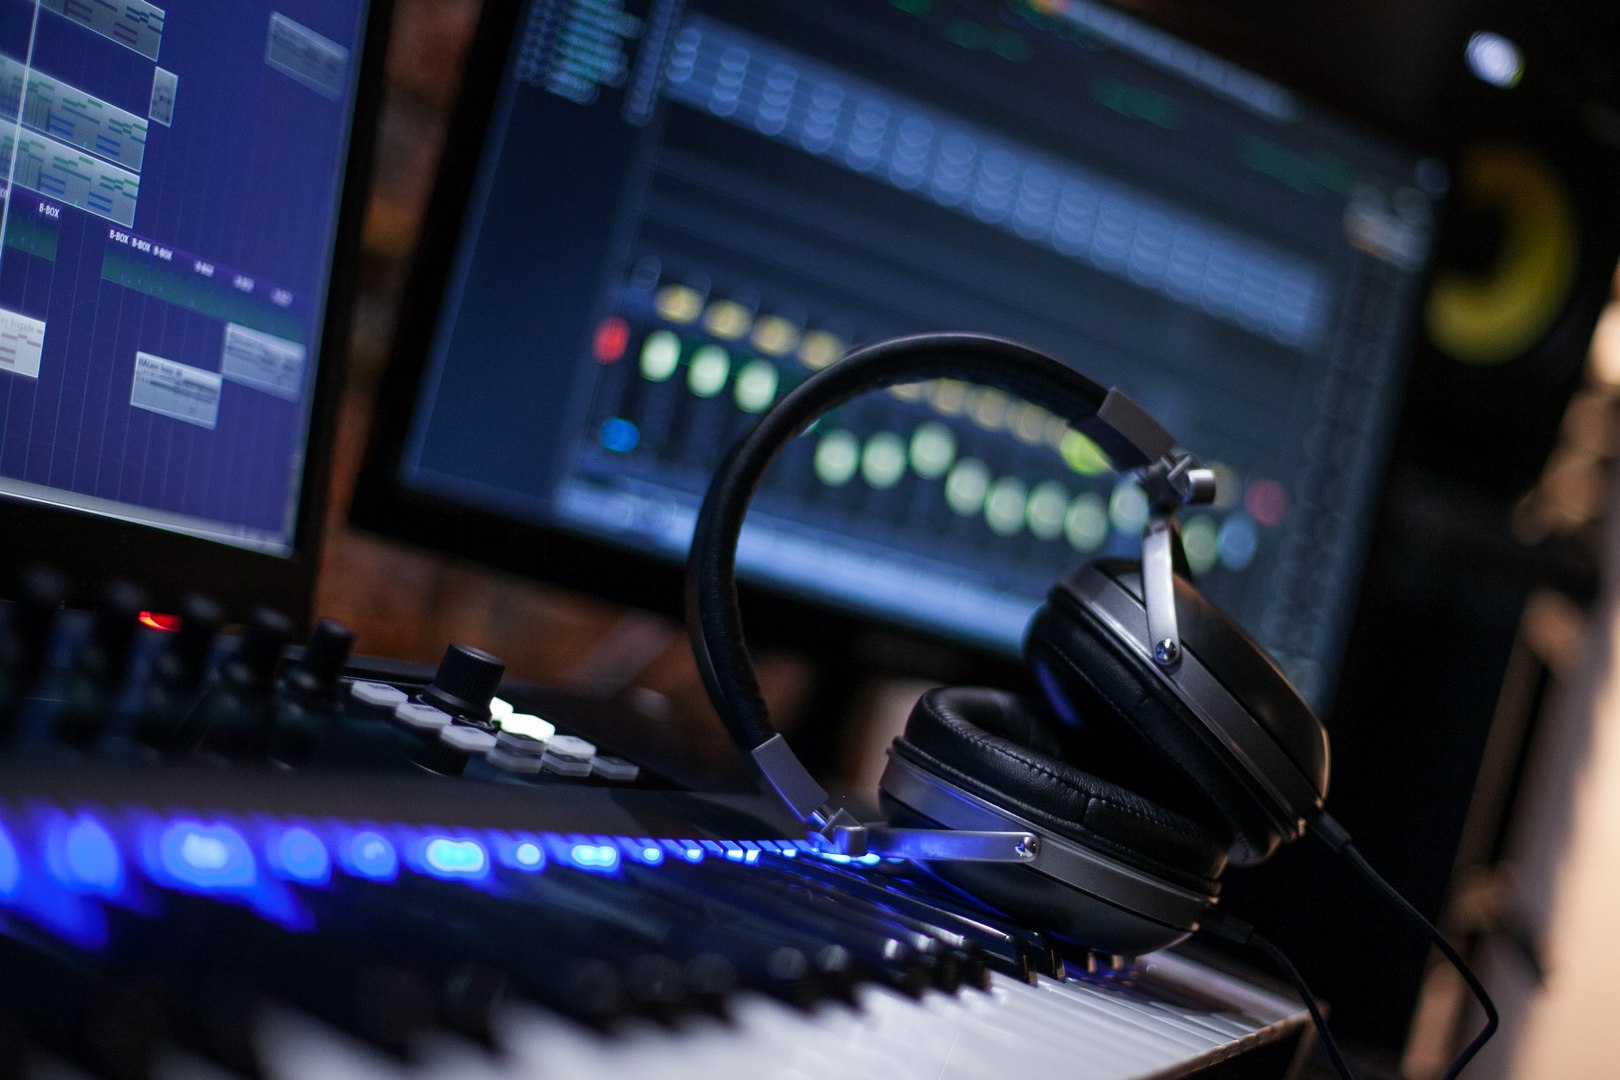 Editing a beat in Cubase with Komplete Kontrol S49